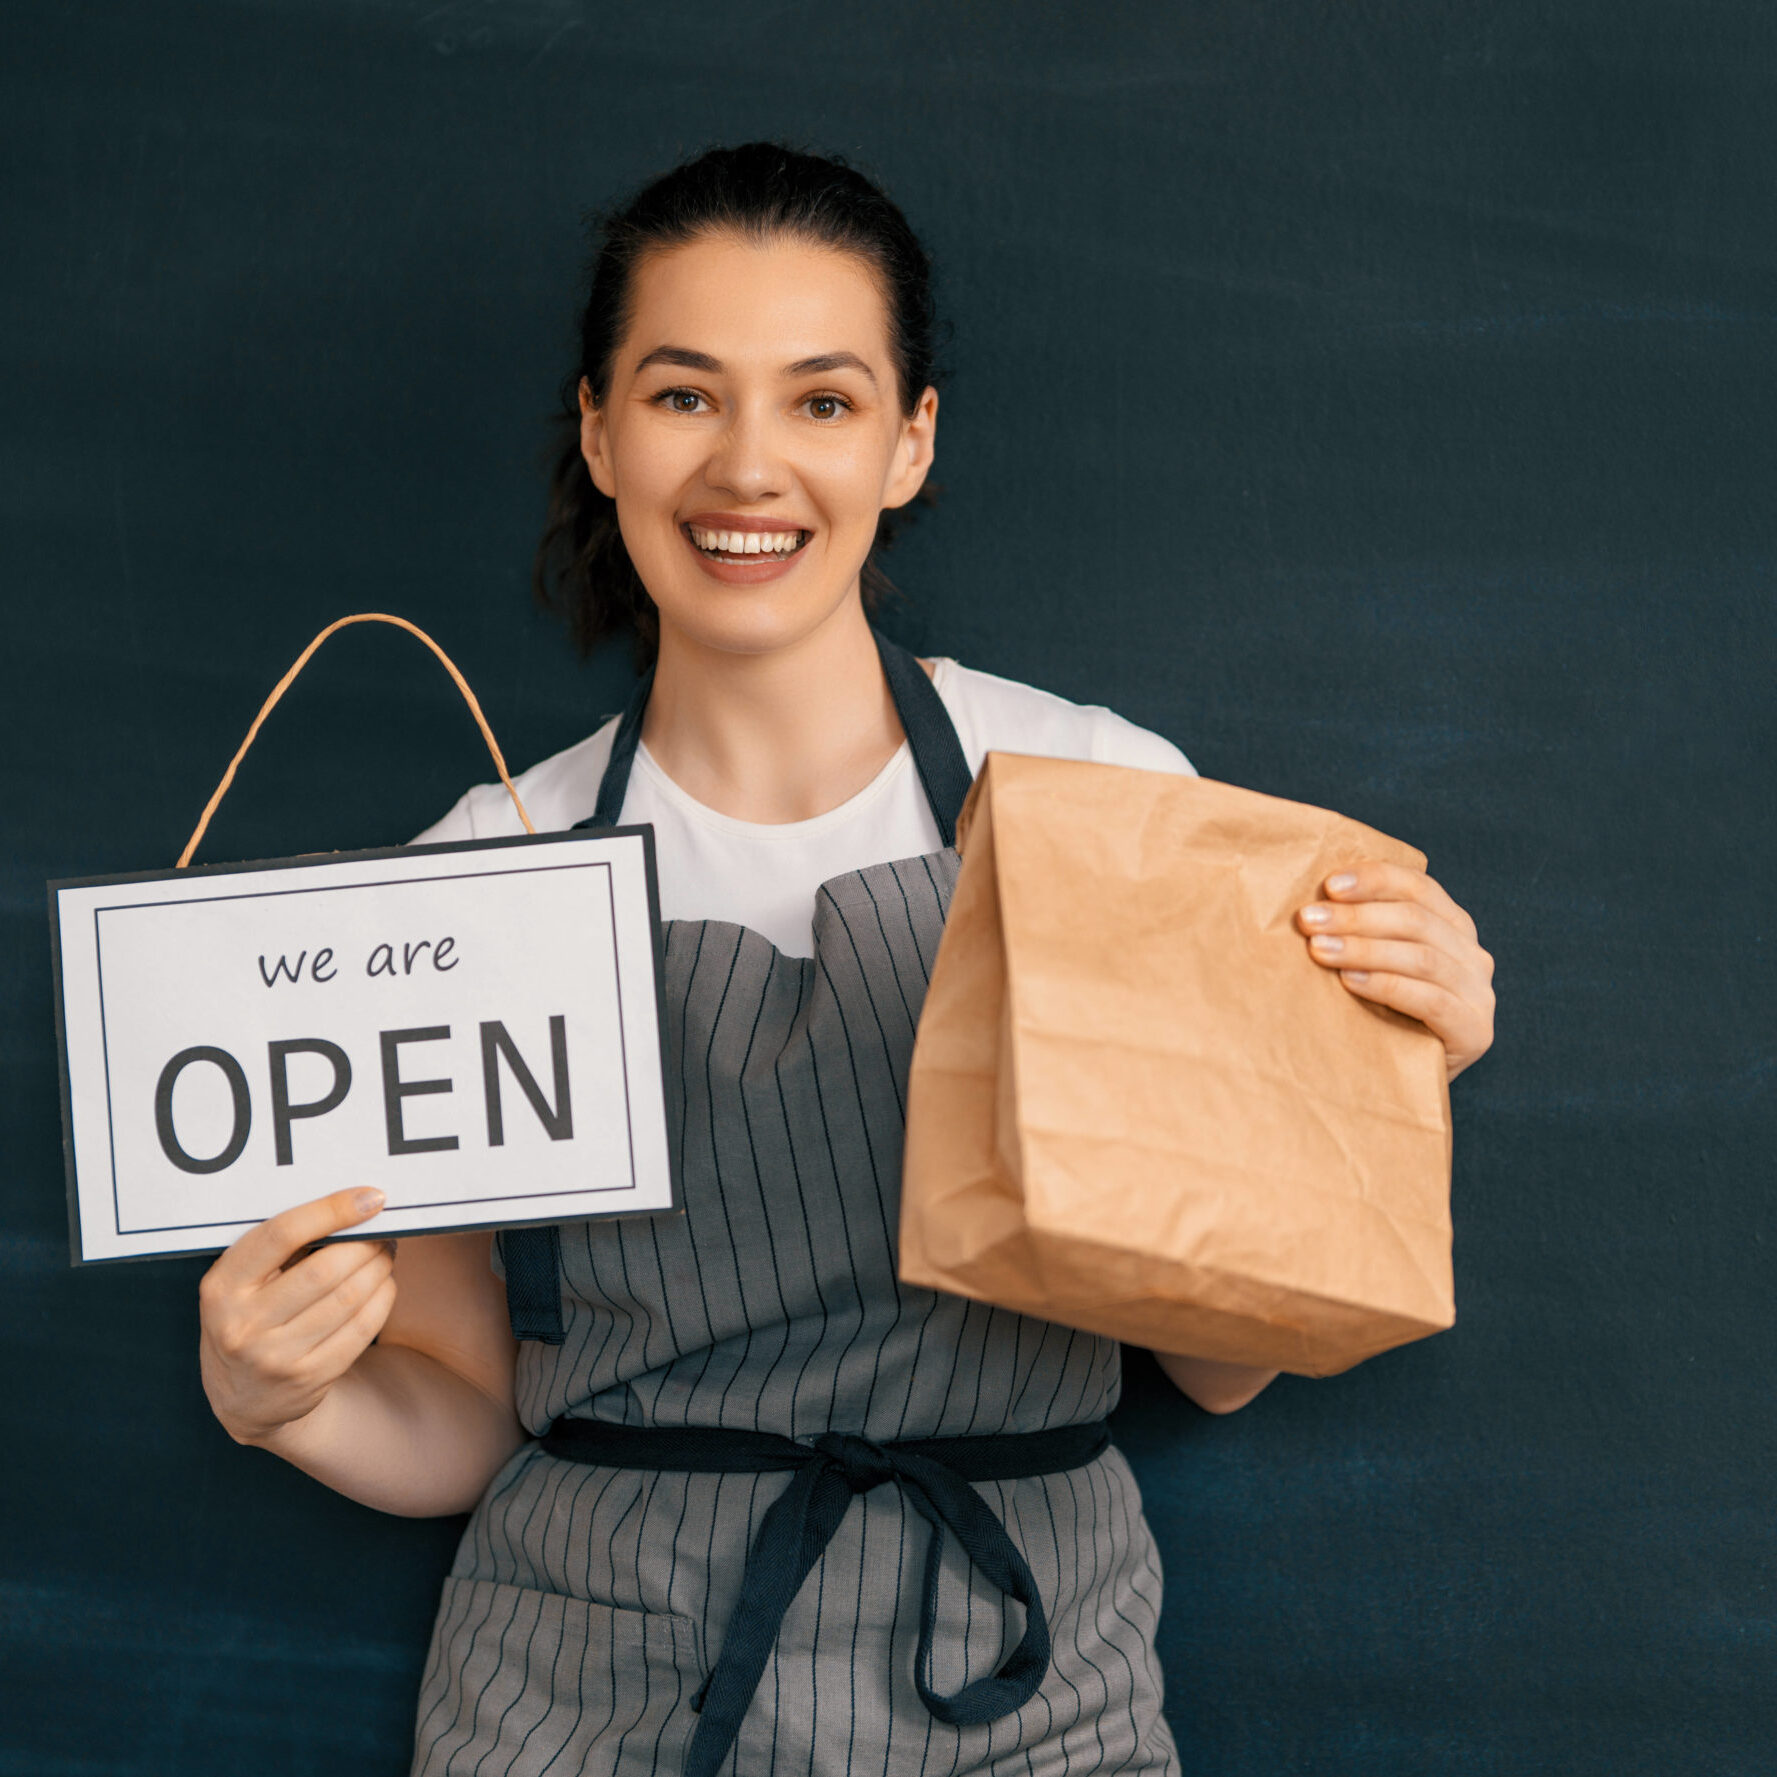 Business woman holding "We are open" sign with curbside pick-up bag.